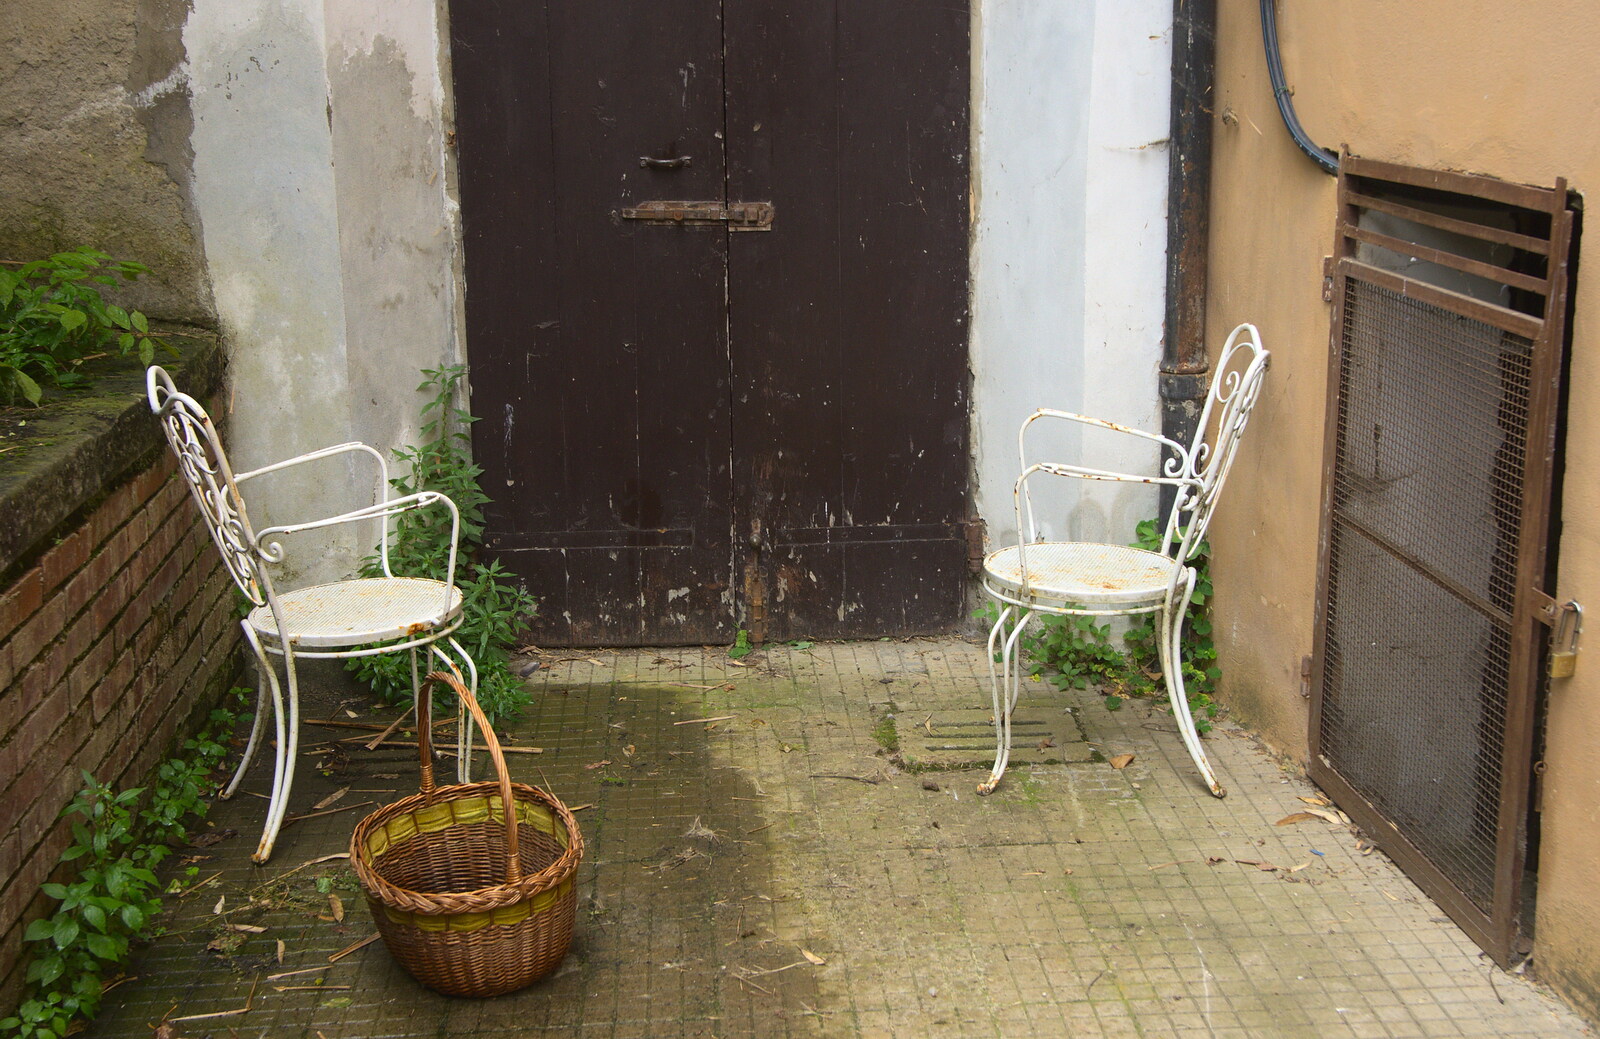 Marconi, Arezzo and the Sagra del Maccherone Festival, Battifolle, Tuscany - 9th June 2013: A pair of distressed garden chairs